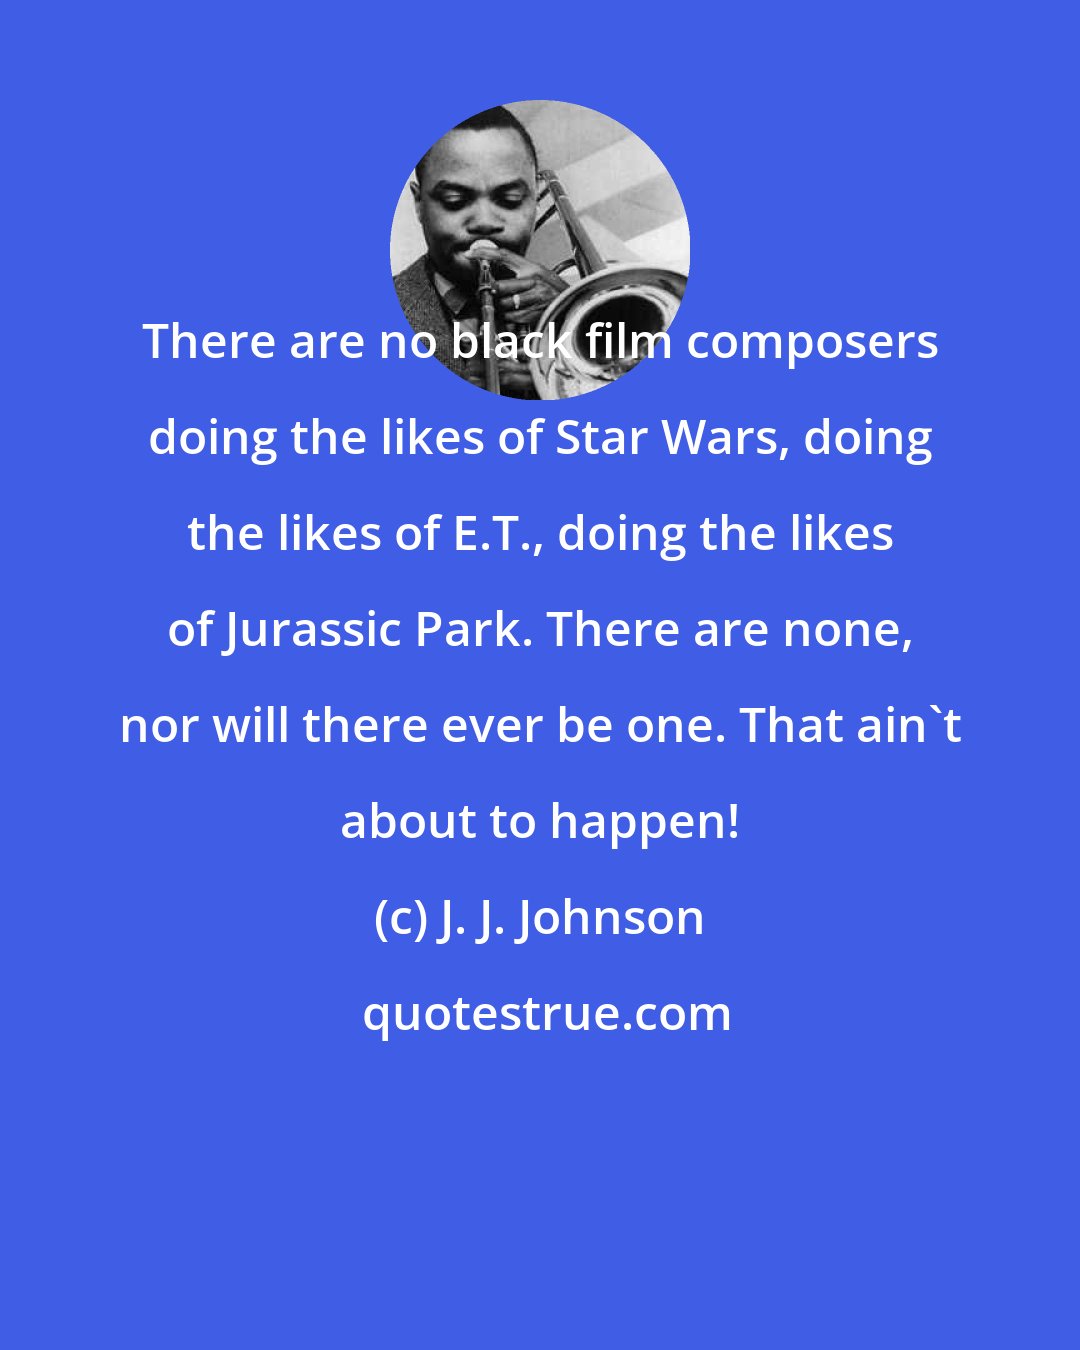 J. J. Johnson: There are no black film composers doing the likes of Star Wars, doing the likes of E.T., doing the likes of Jurassic Park. There are none, nor will there ever be one. That ain't about to happen!